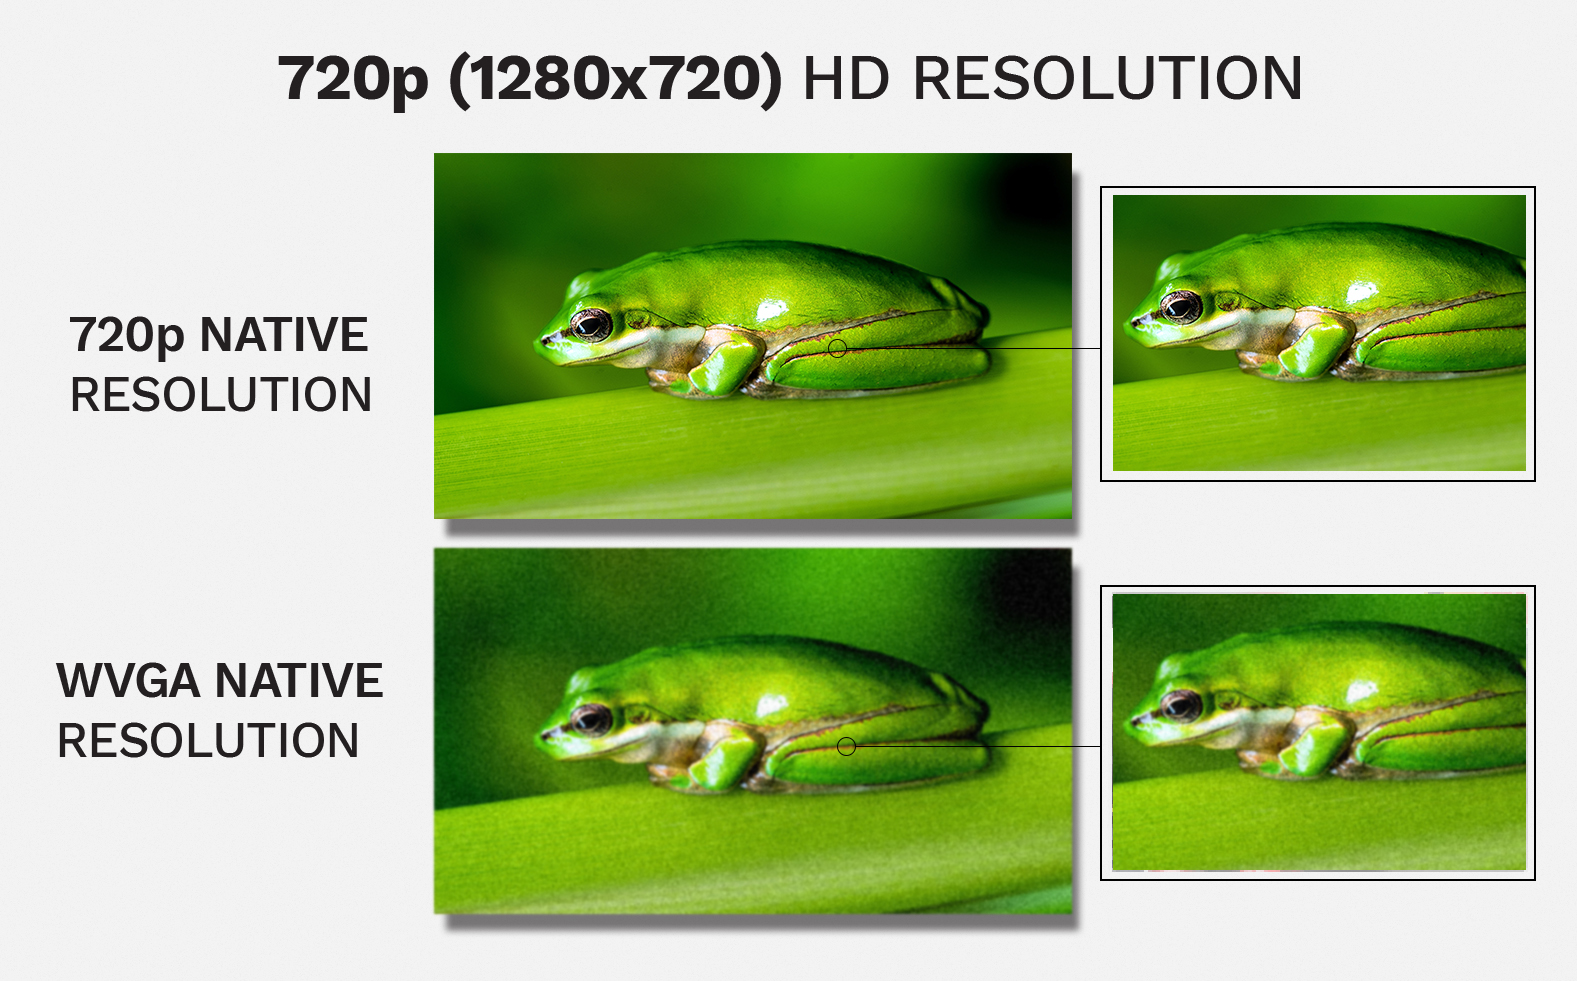 Native 720P (1280x720) HD Resolution. S2 supports up to 1080P max resolution.